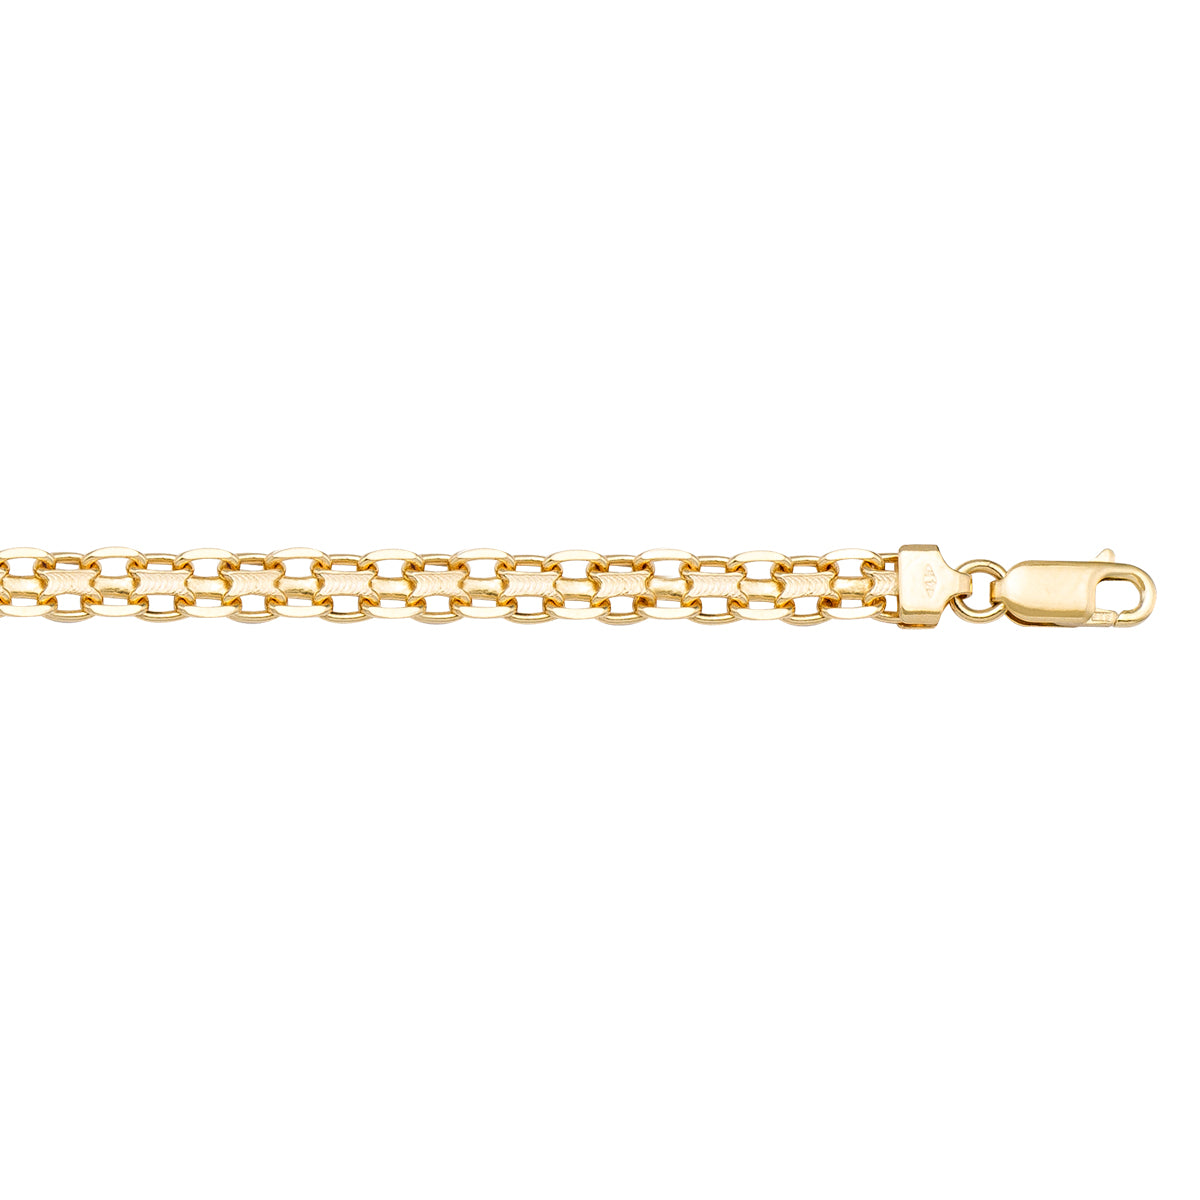 CHAINS YELLOW GOLD SOLID BISMARK LINK 